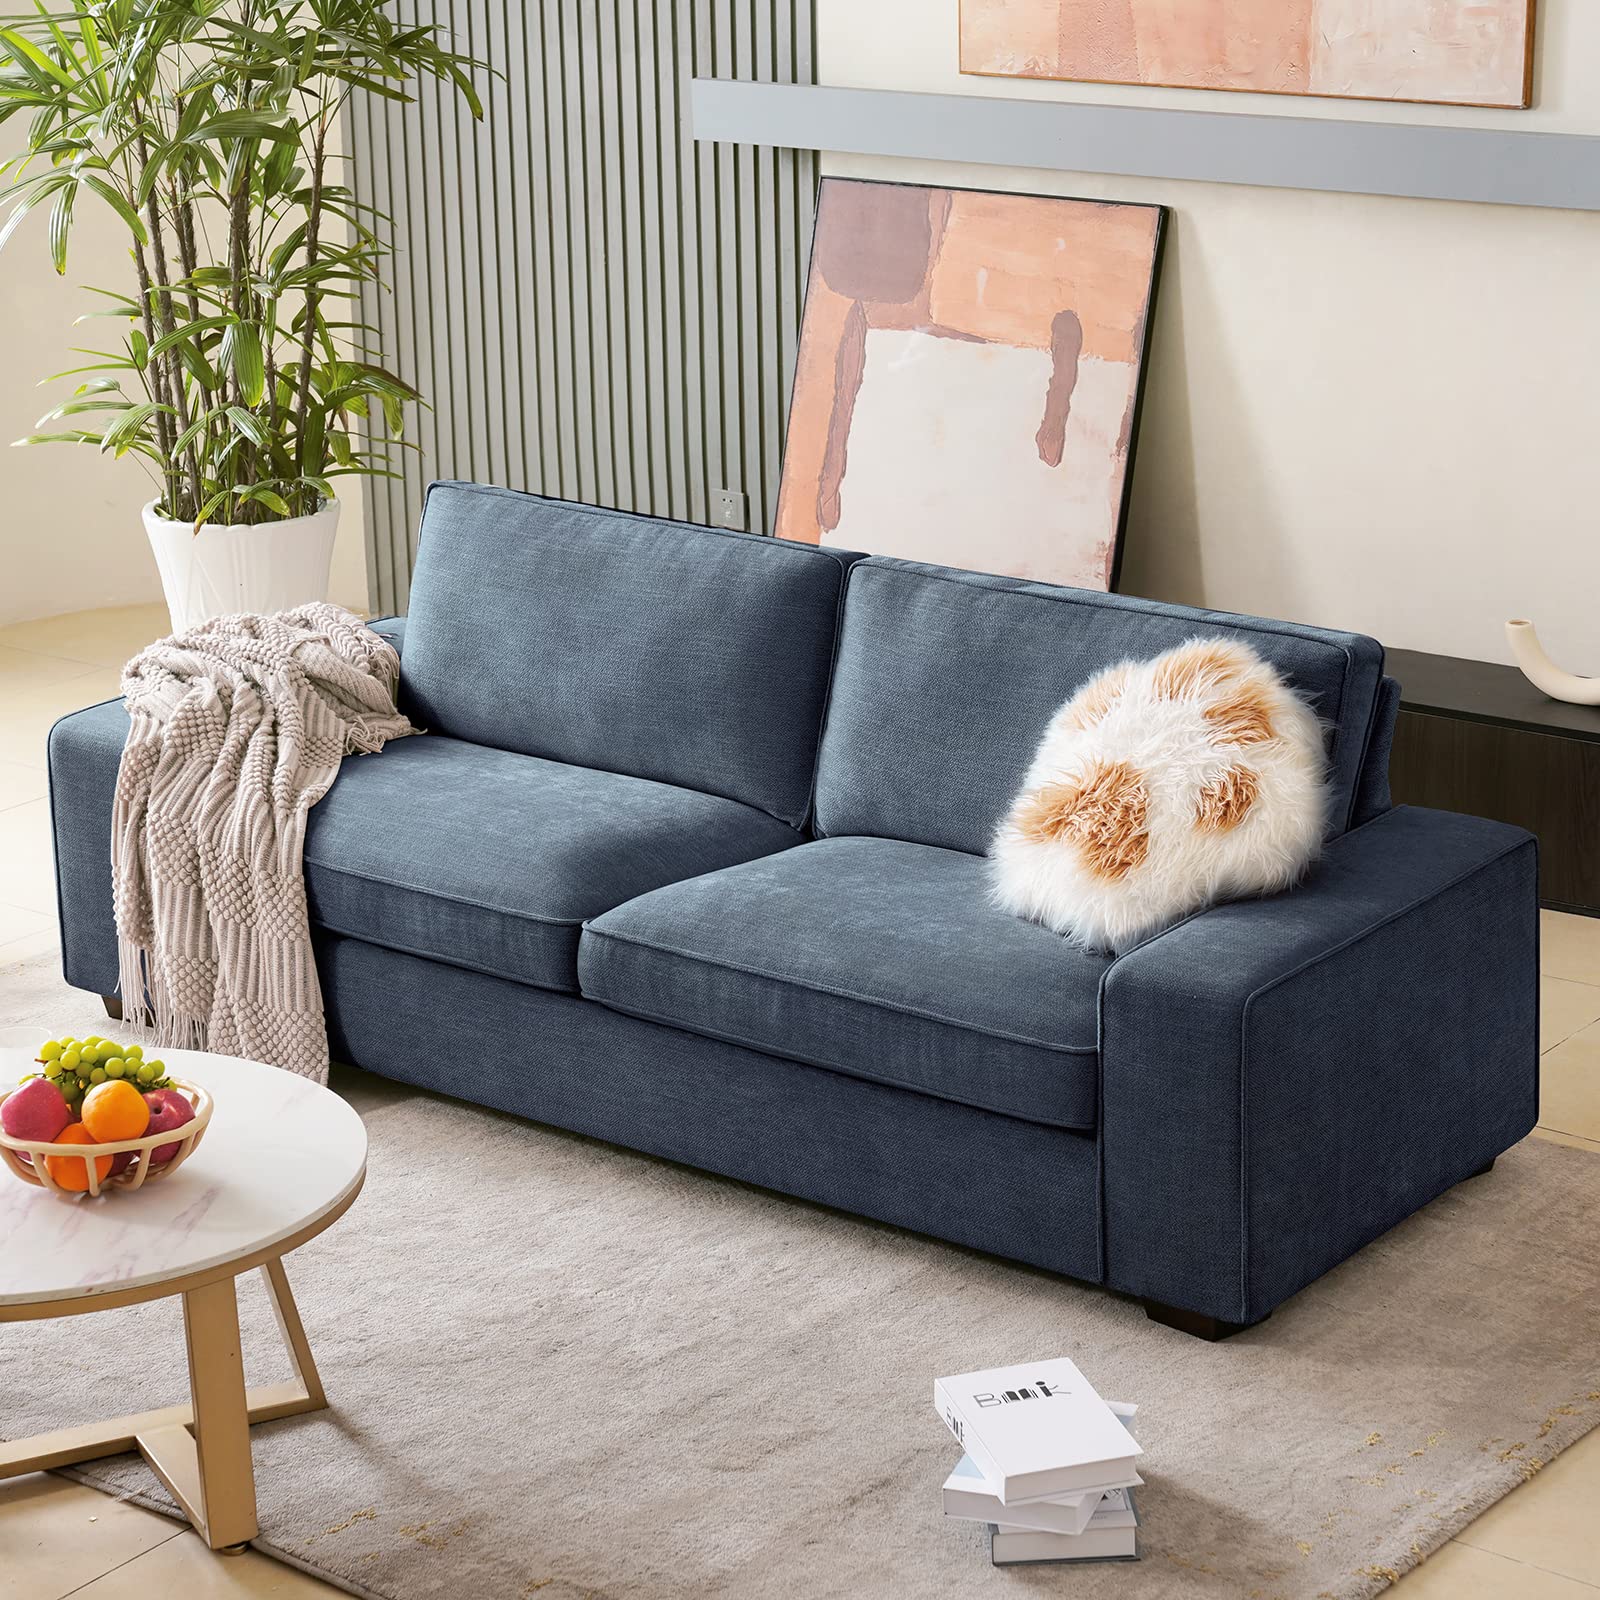 Special discounts on dark blue modern loveseat sofas being sold at coosleep home